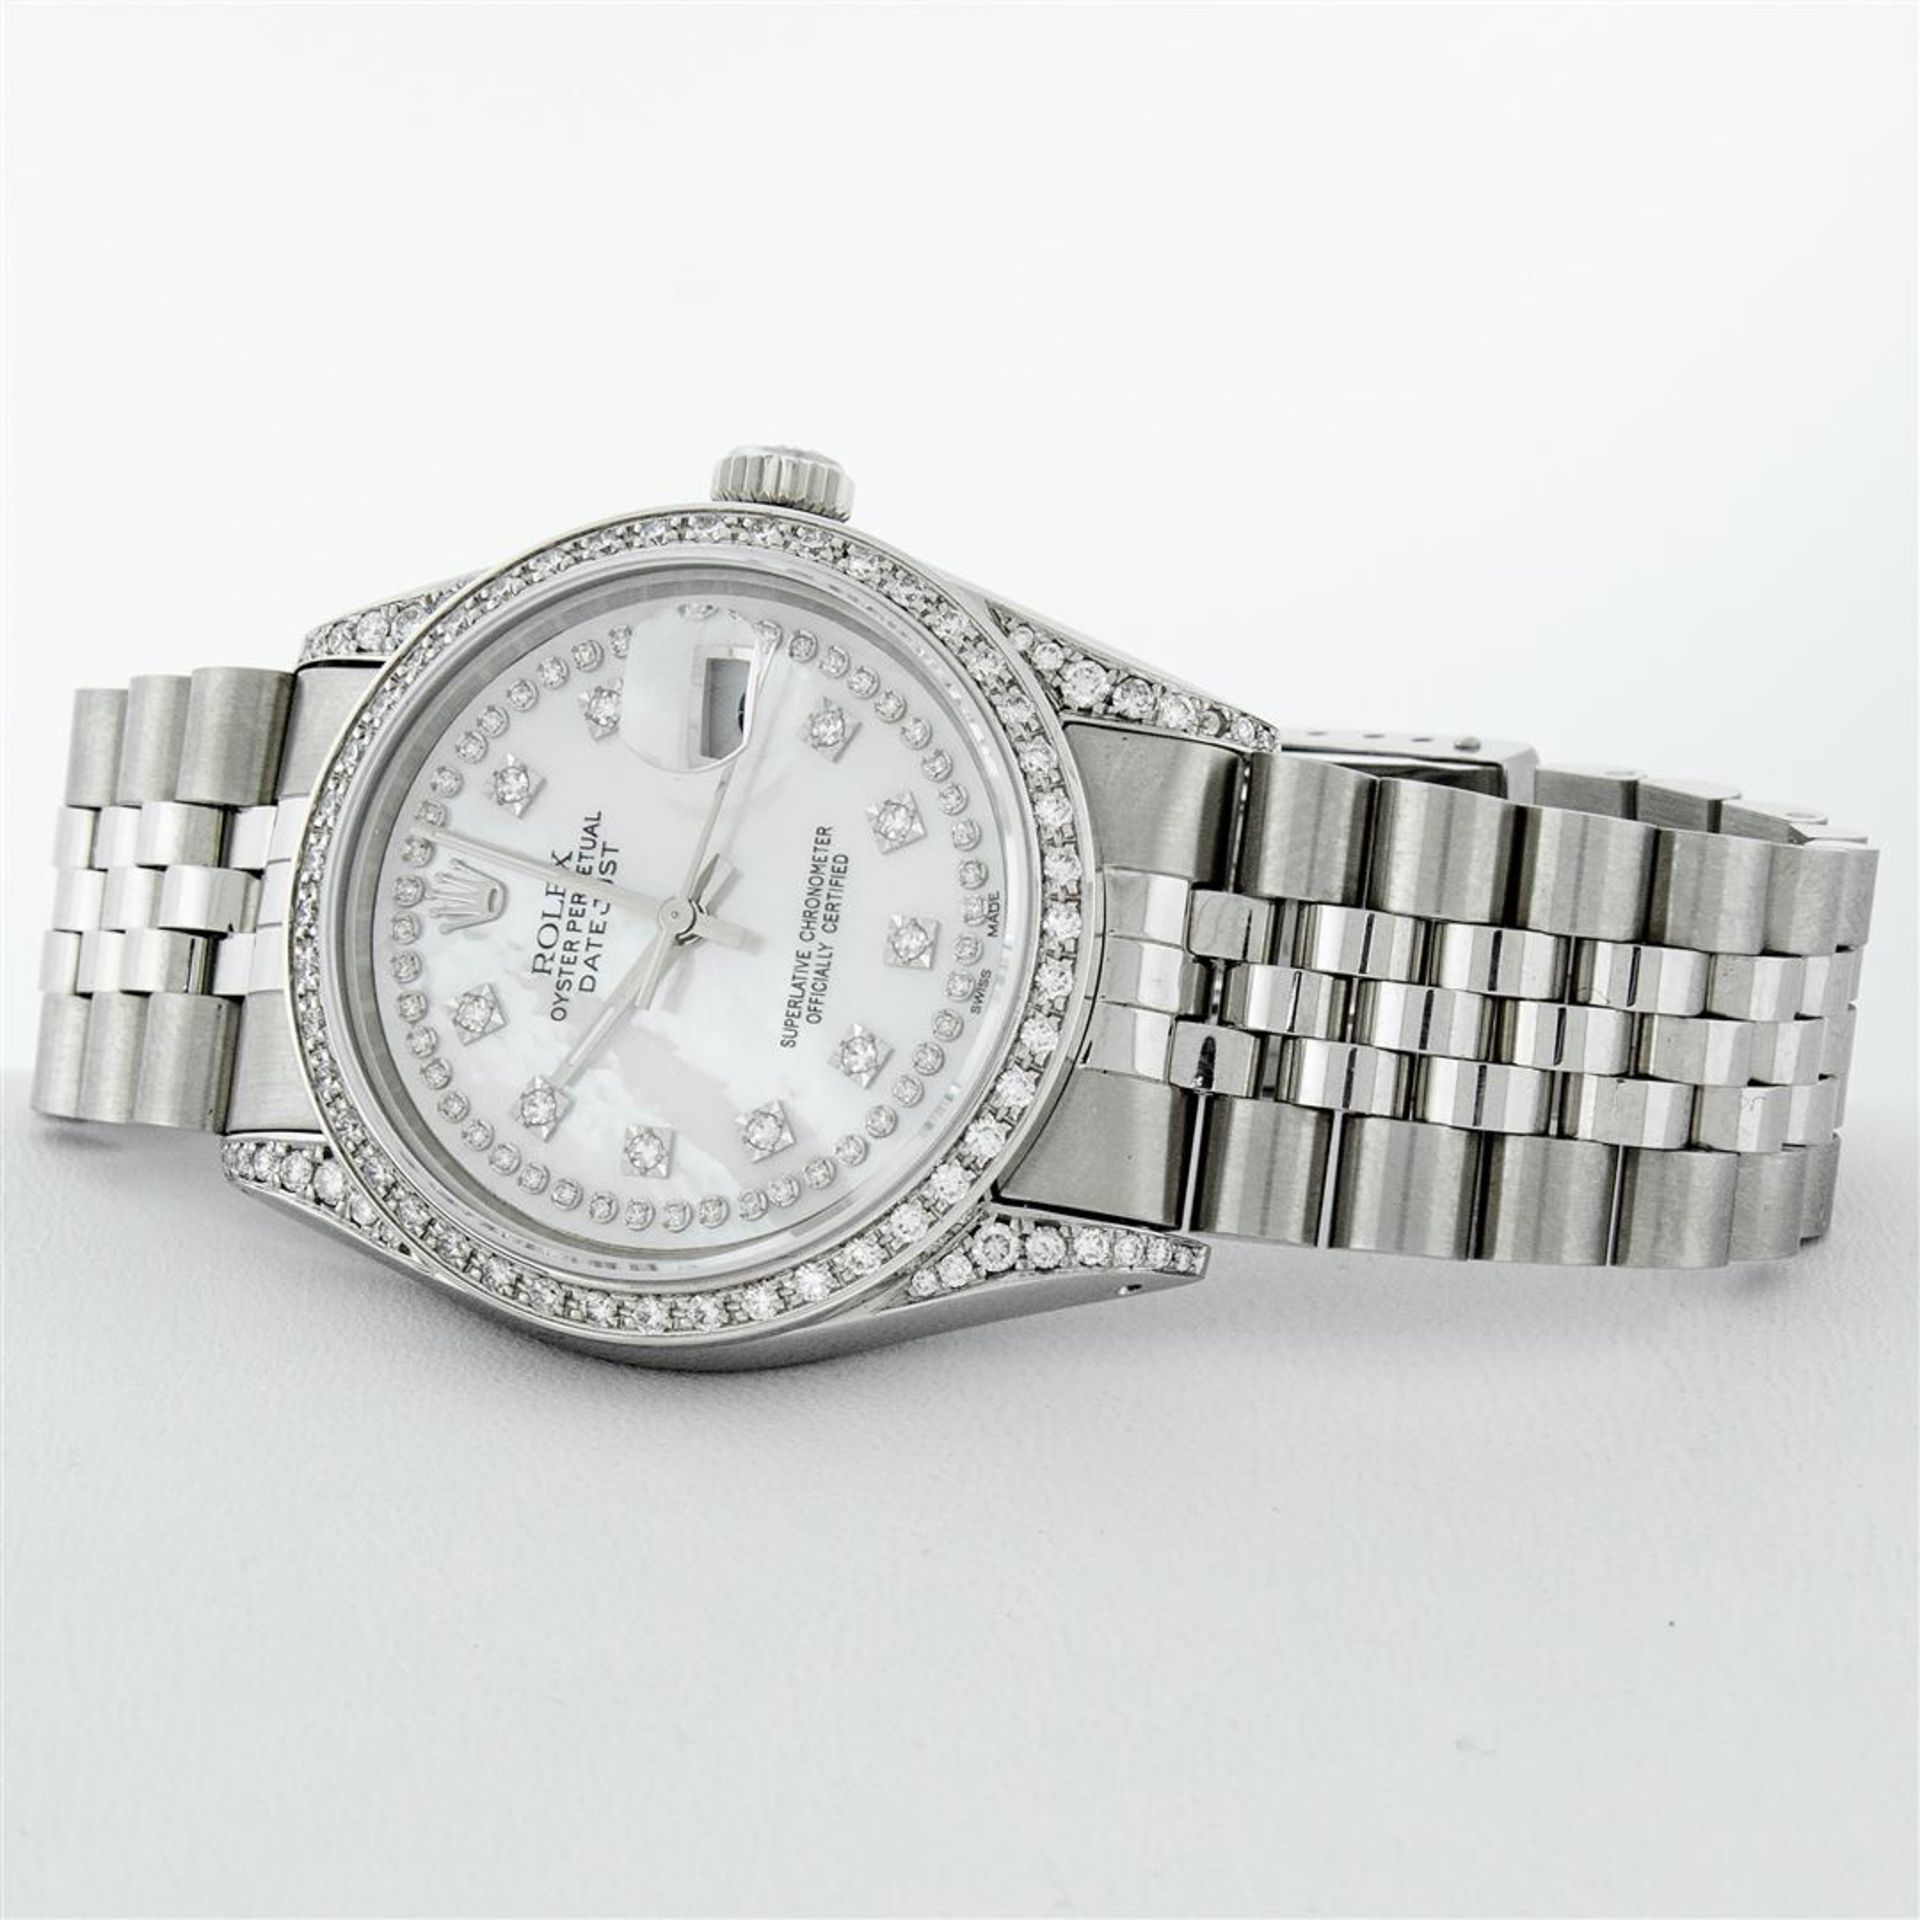 Rolex Mens Stainless Steel Mother Of Pearl Diamond Lugs Datejust Wristwatch - Image 4 of 9